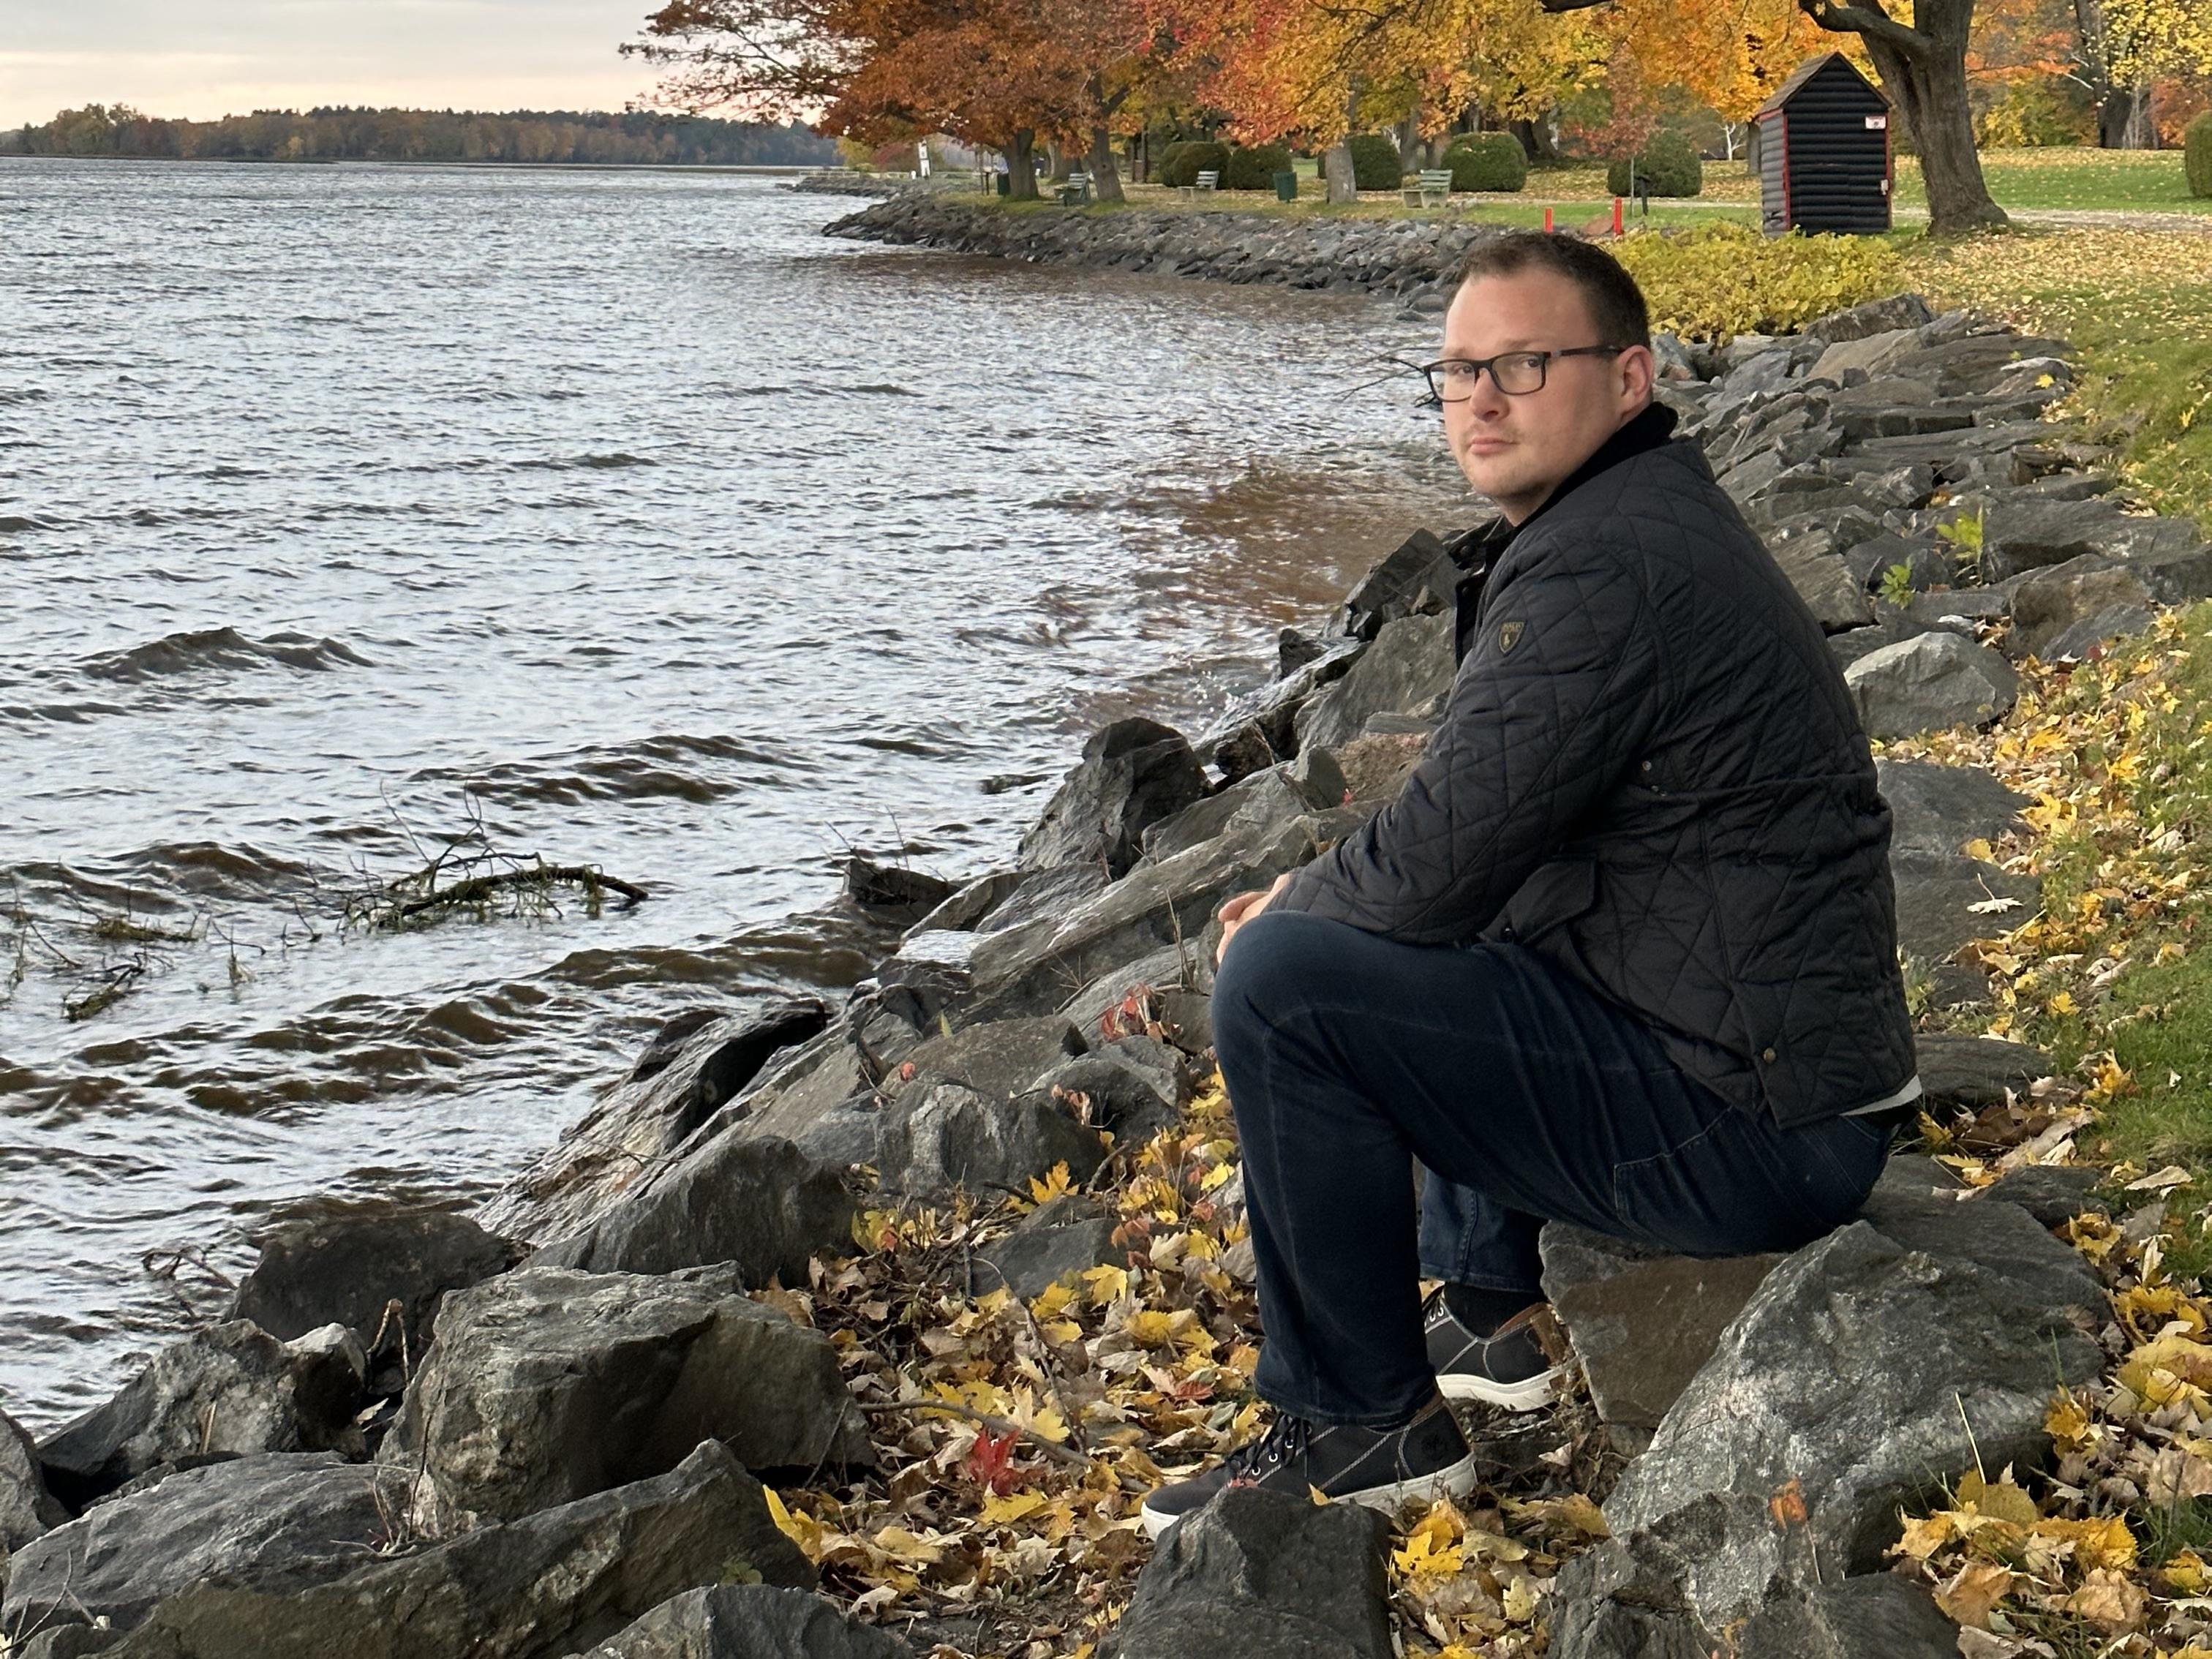 Professor Chad Cowie crouching by a rocky lake shoreline in autumn